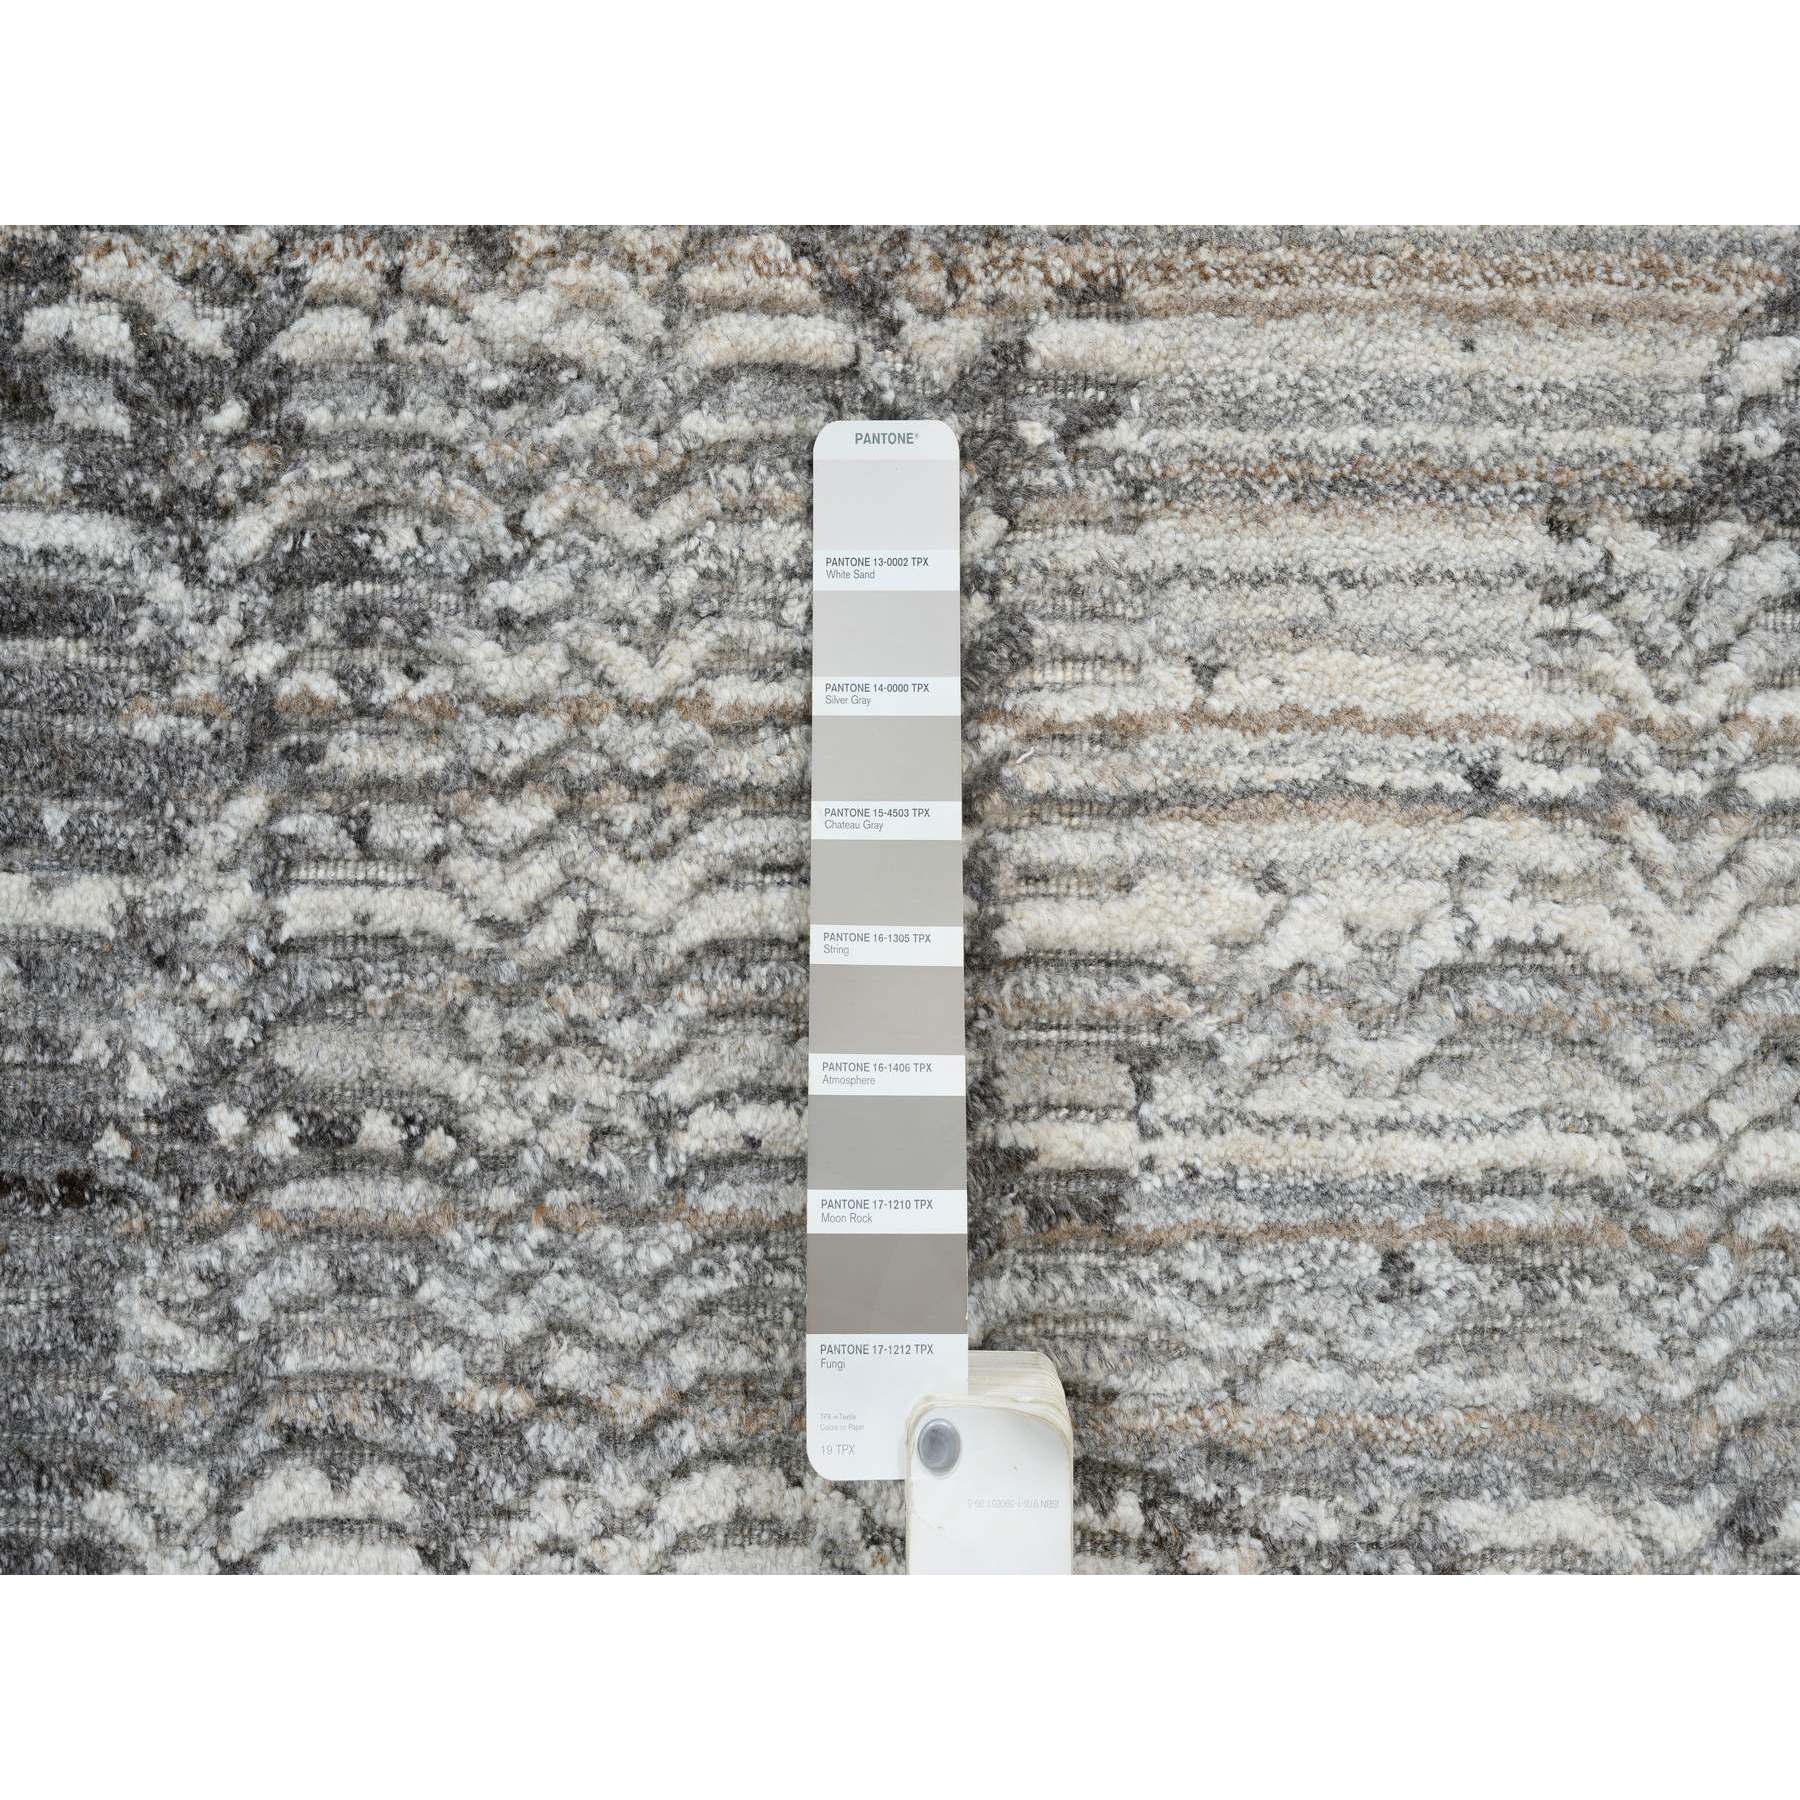 9'1"x12' Gray Variegated Texture Modern Abstract Design, Natural Wool, Hand Loomed Oriental Rug 